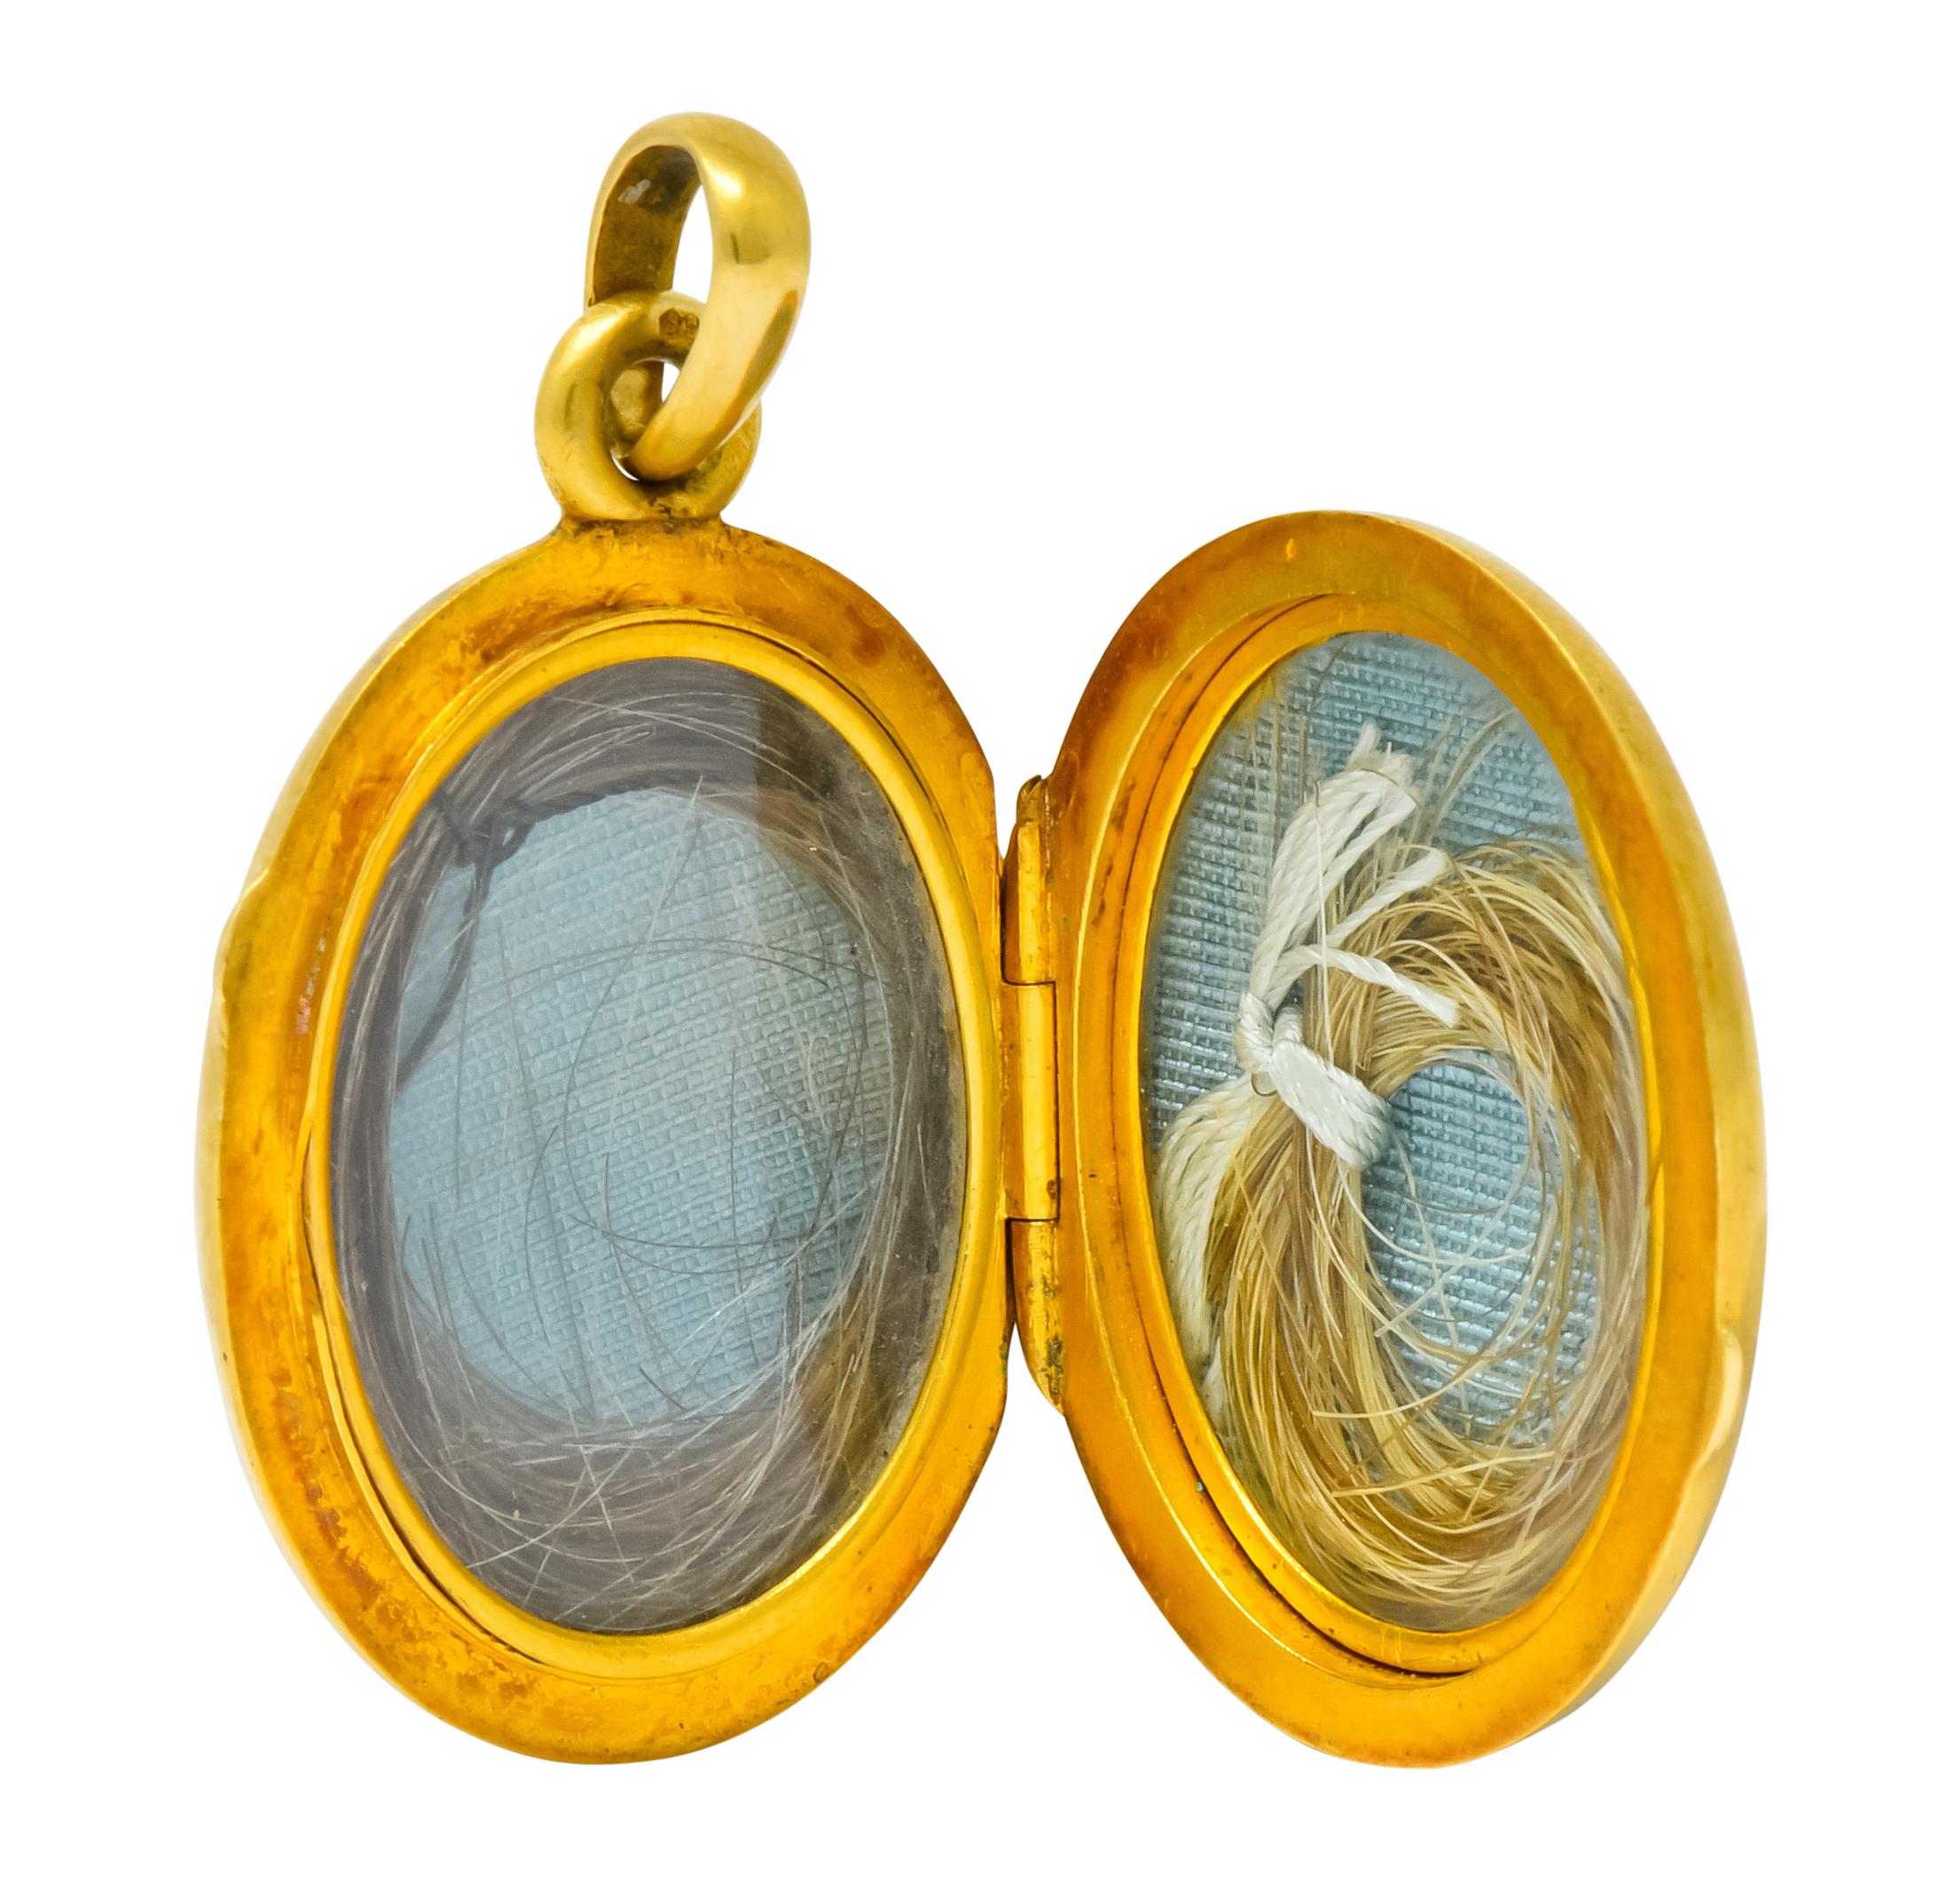 Enameled oval locket depicting two hand painted winged cherubs floating among a cloudy blue sky, no enamel loss, consistent with age, wear, and use

Wings are accented by rose cut diamonds, eye-clean and white

Locket opens on a hinge to reveal two